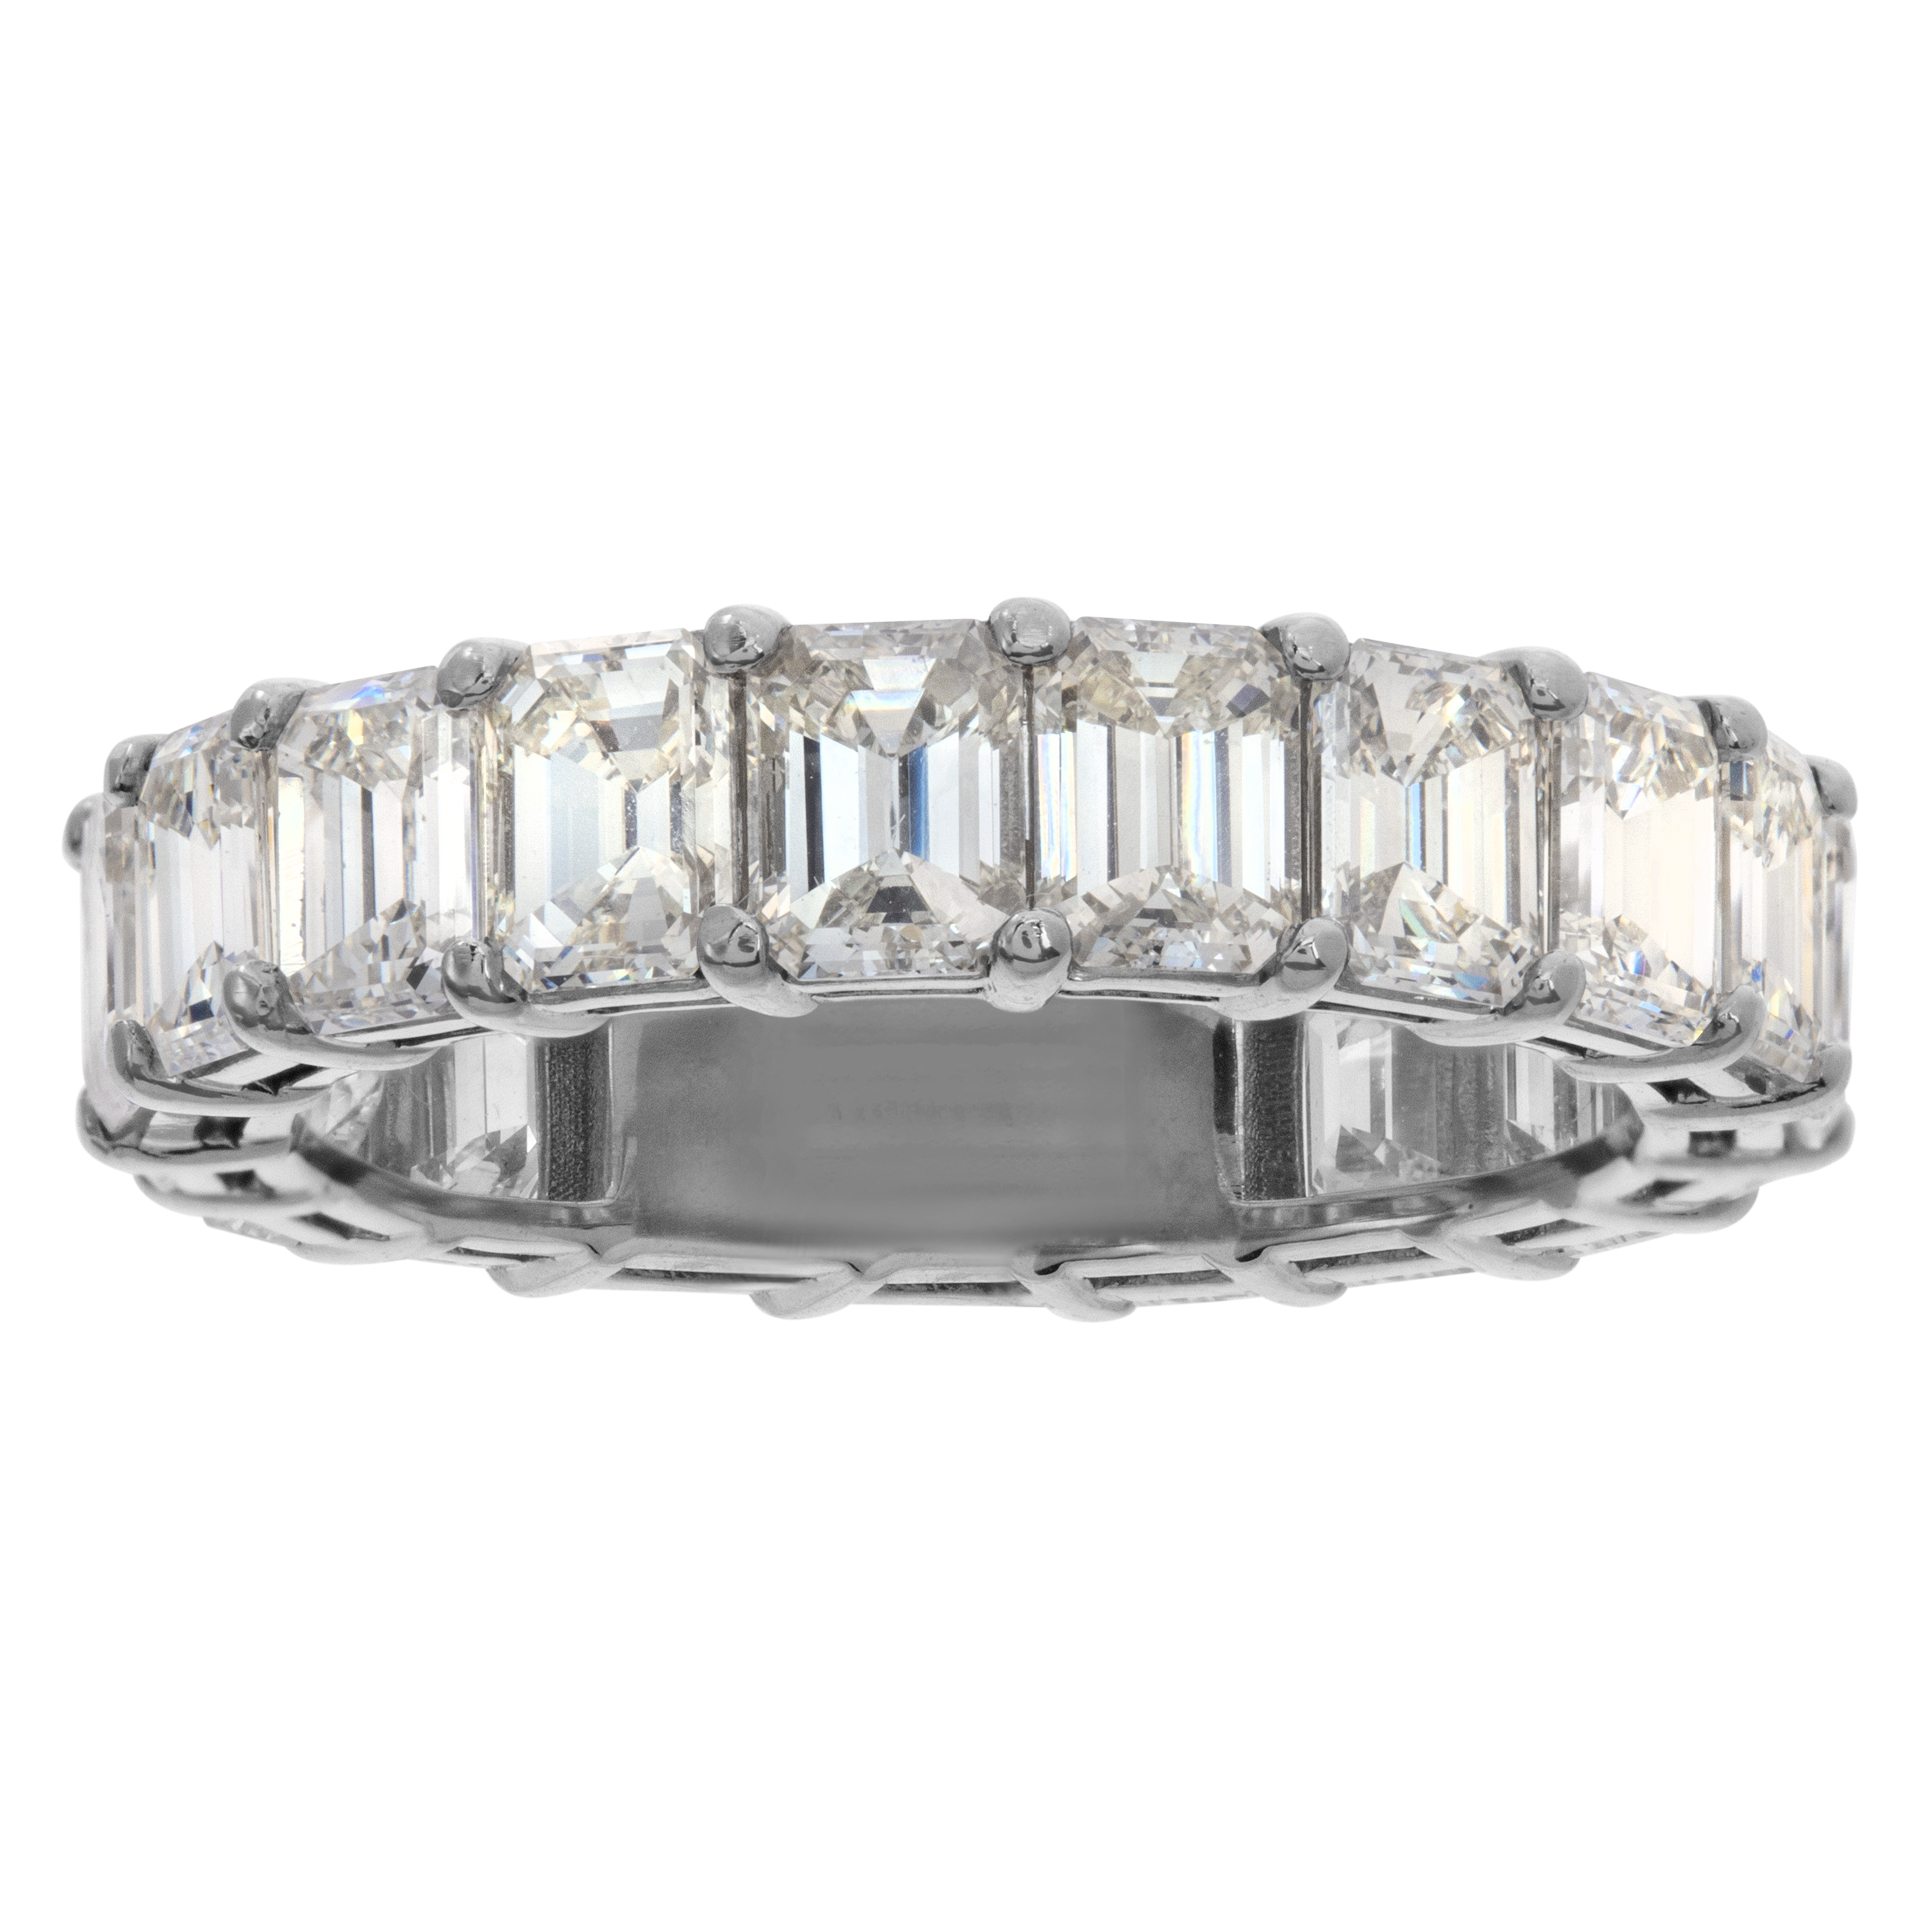 Emerald cut eternity band with approximately 6 carats set in platinum